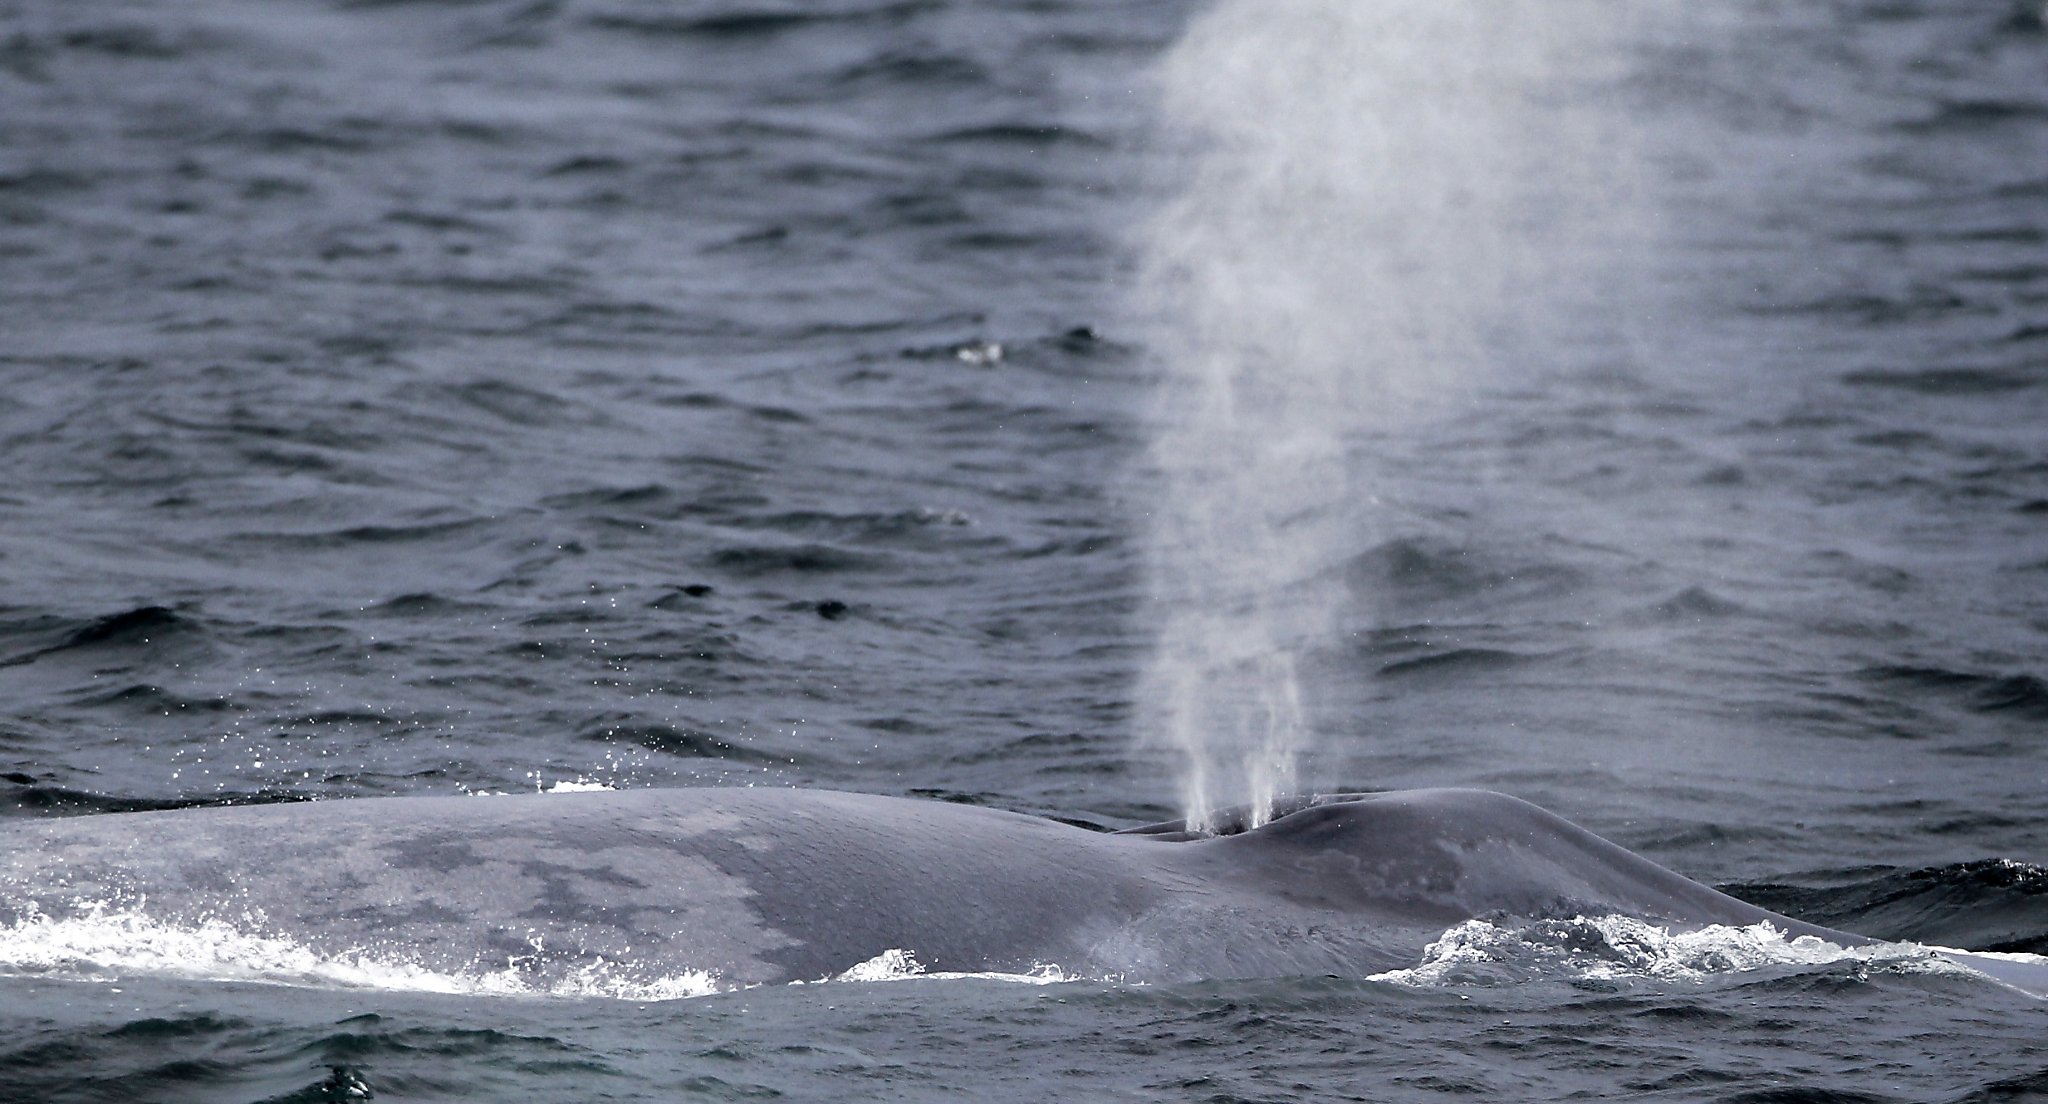 Most blue whales are 'righties,' except for this one move